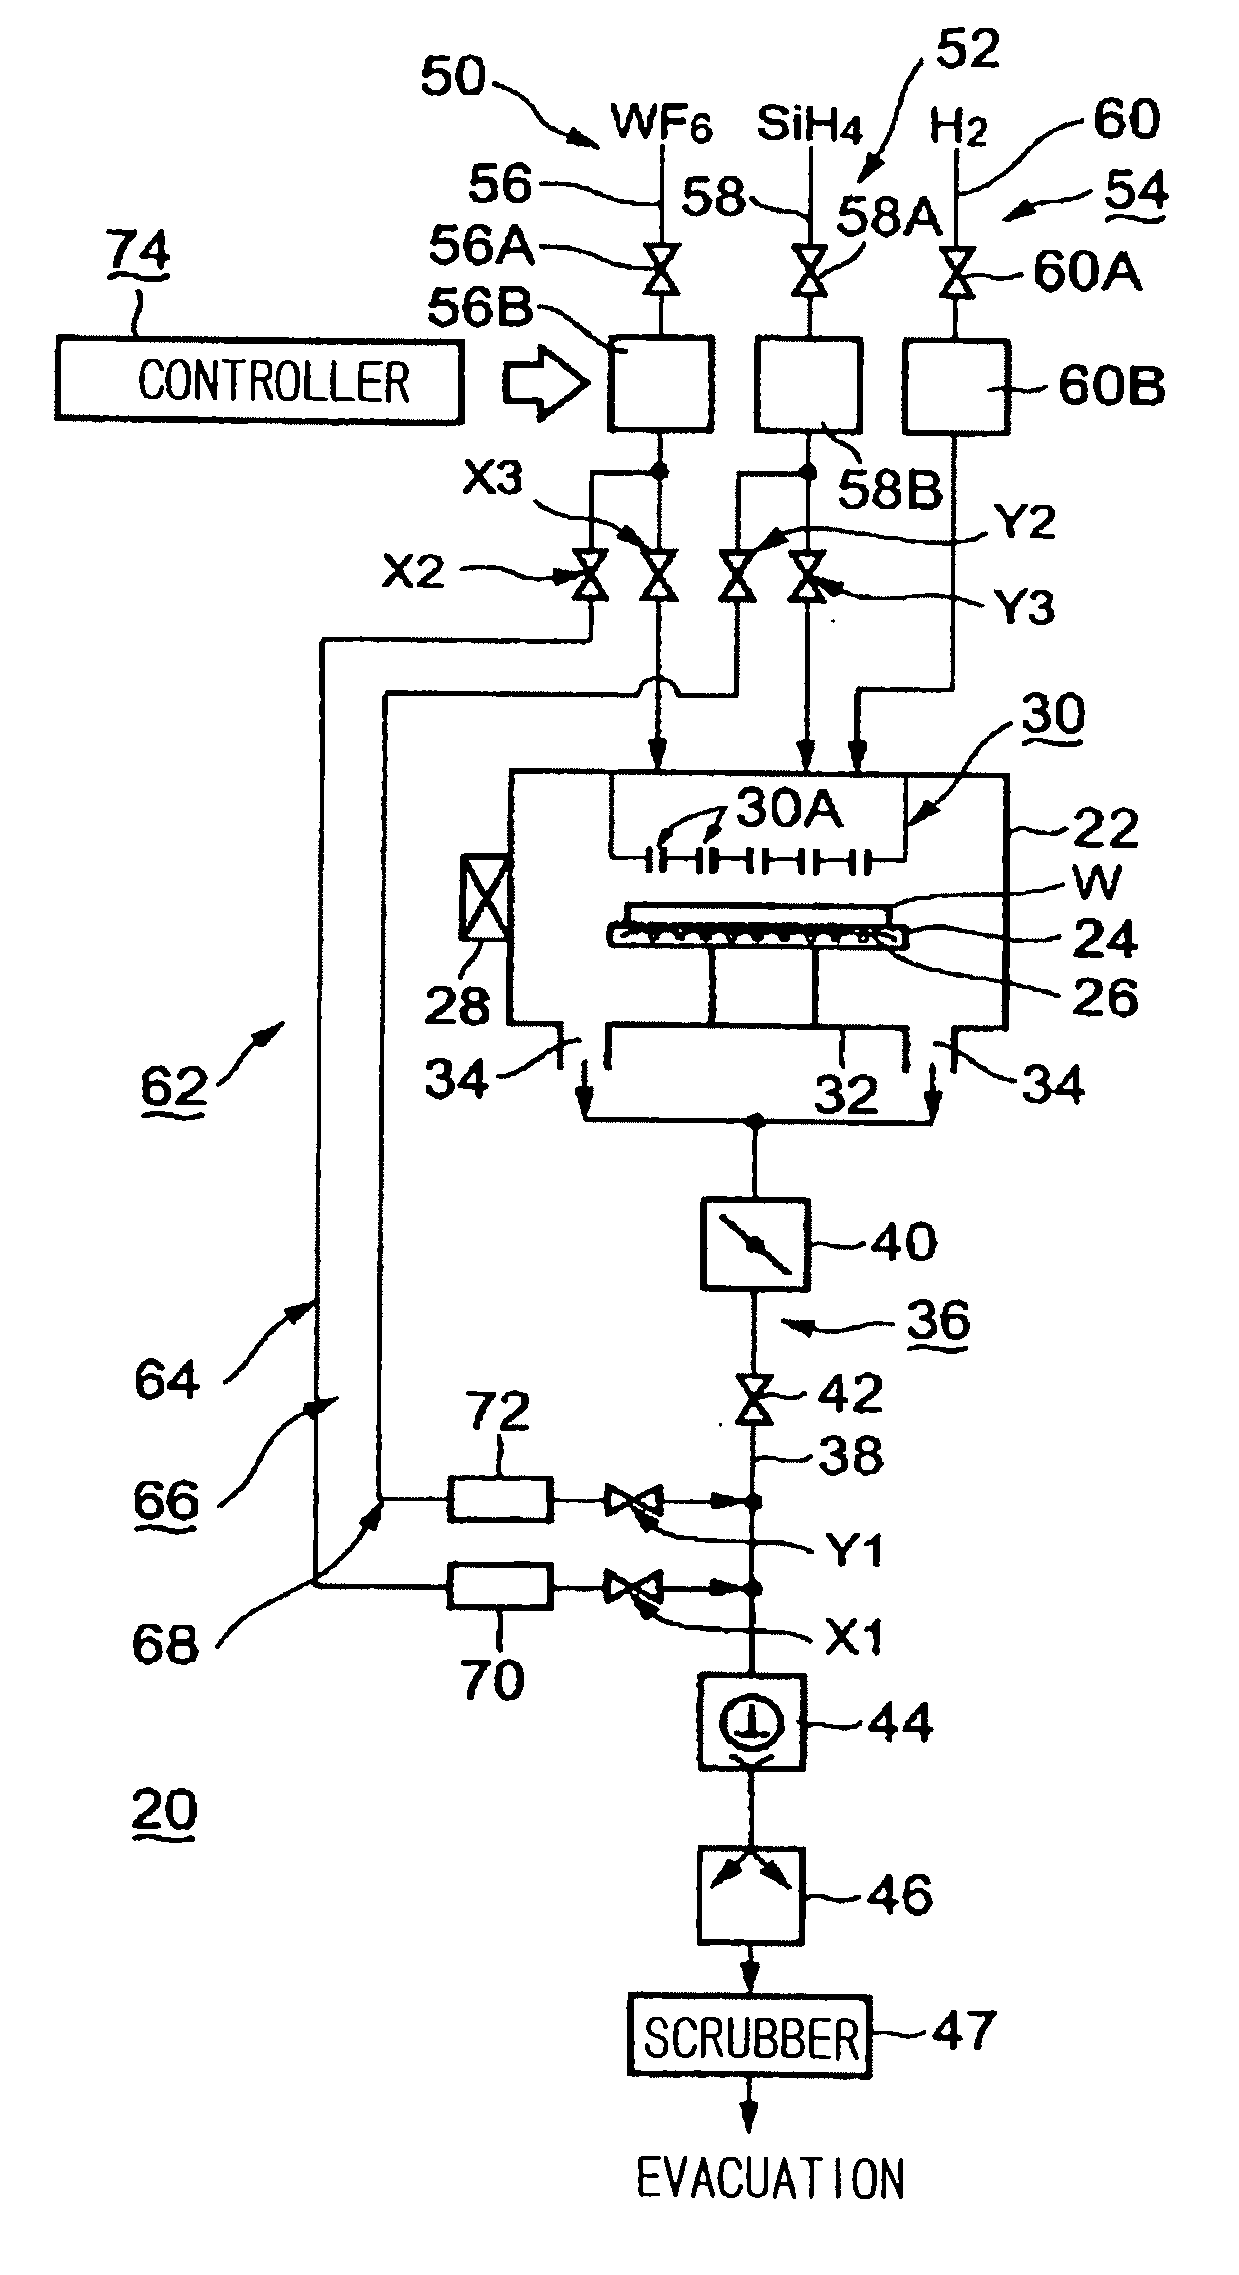 Processing apparatus using source gas and reactive gas